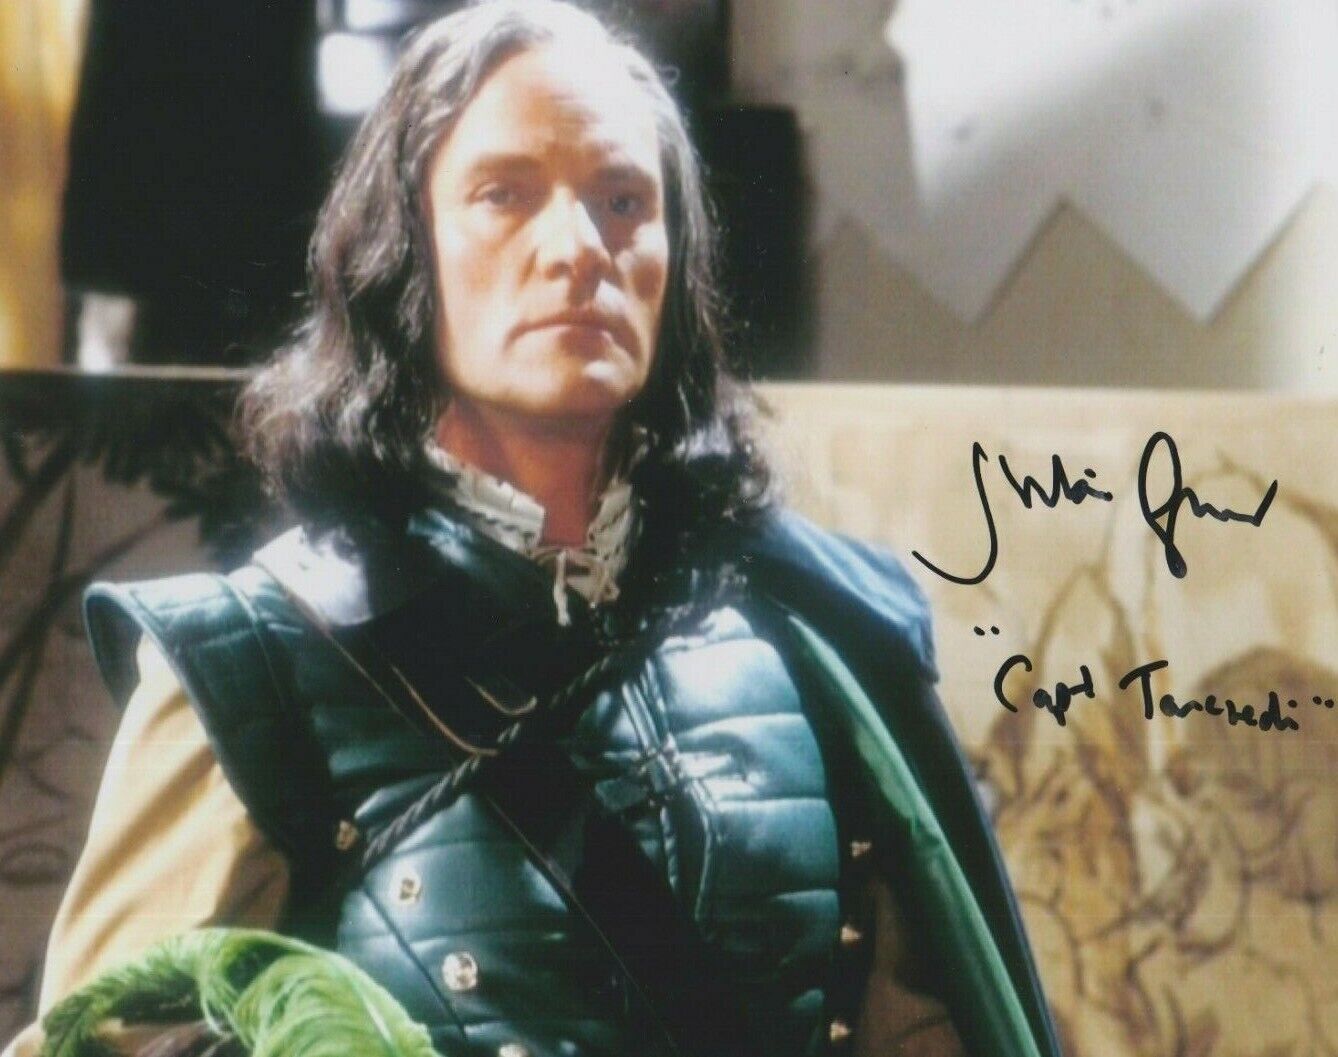 Julian Glover **HAND SIGNED** 8x10 Photo Poster painting ~ AUTOGRAPHED ~ Doctor Who